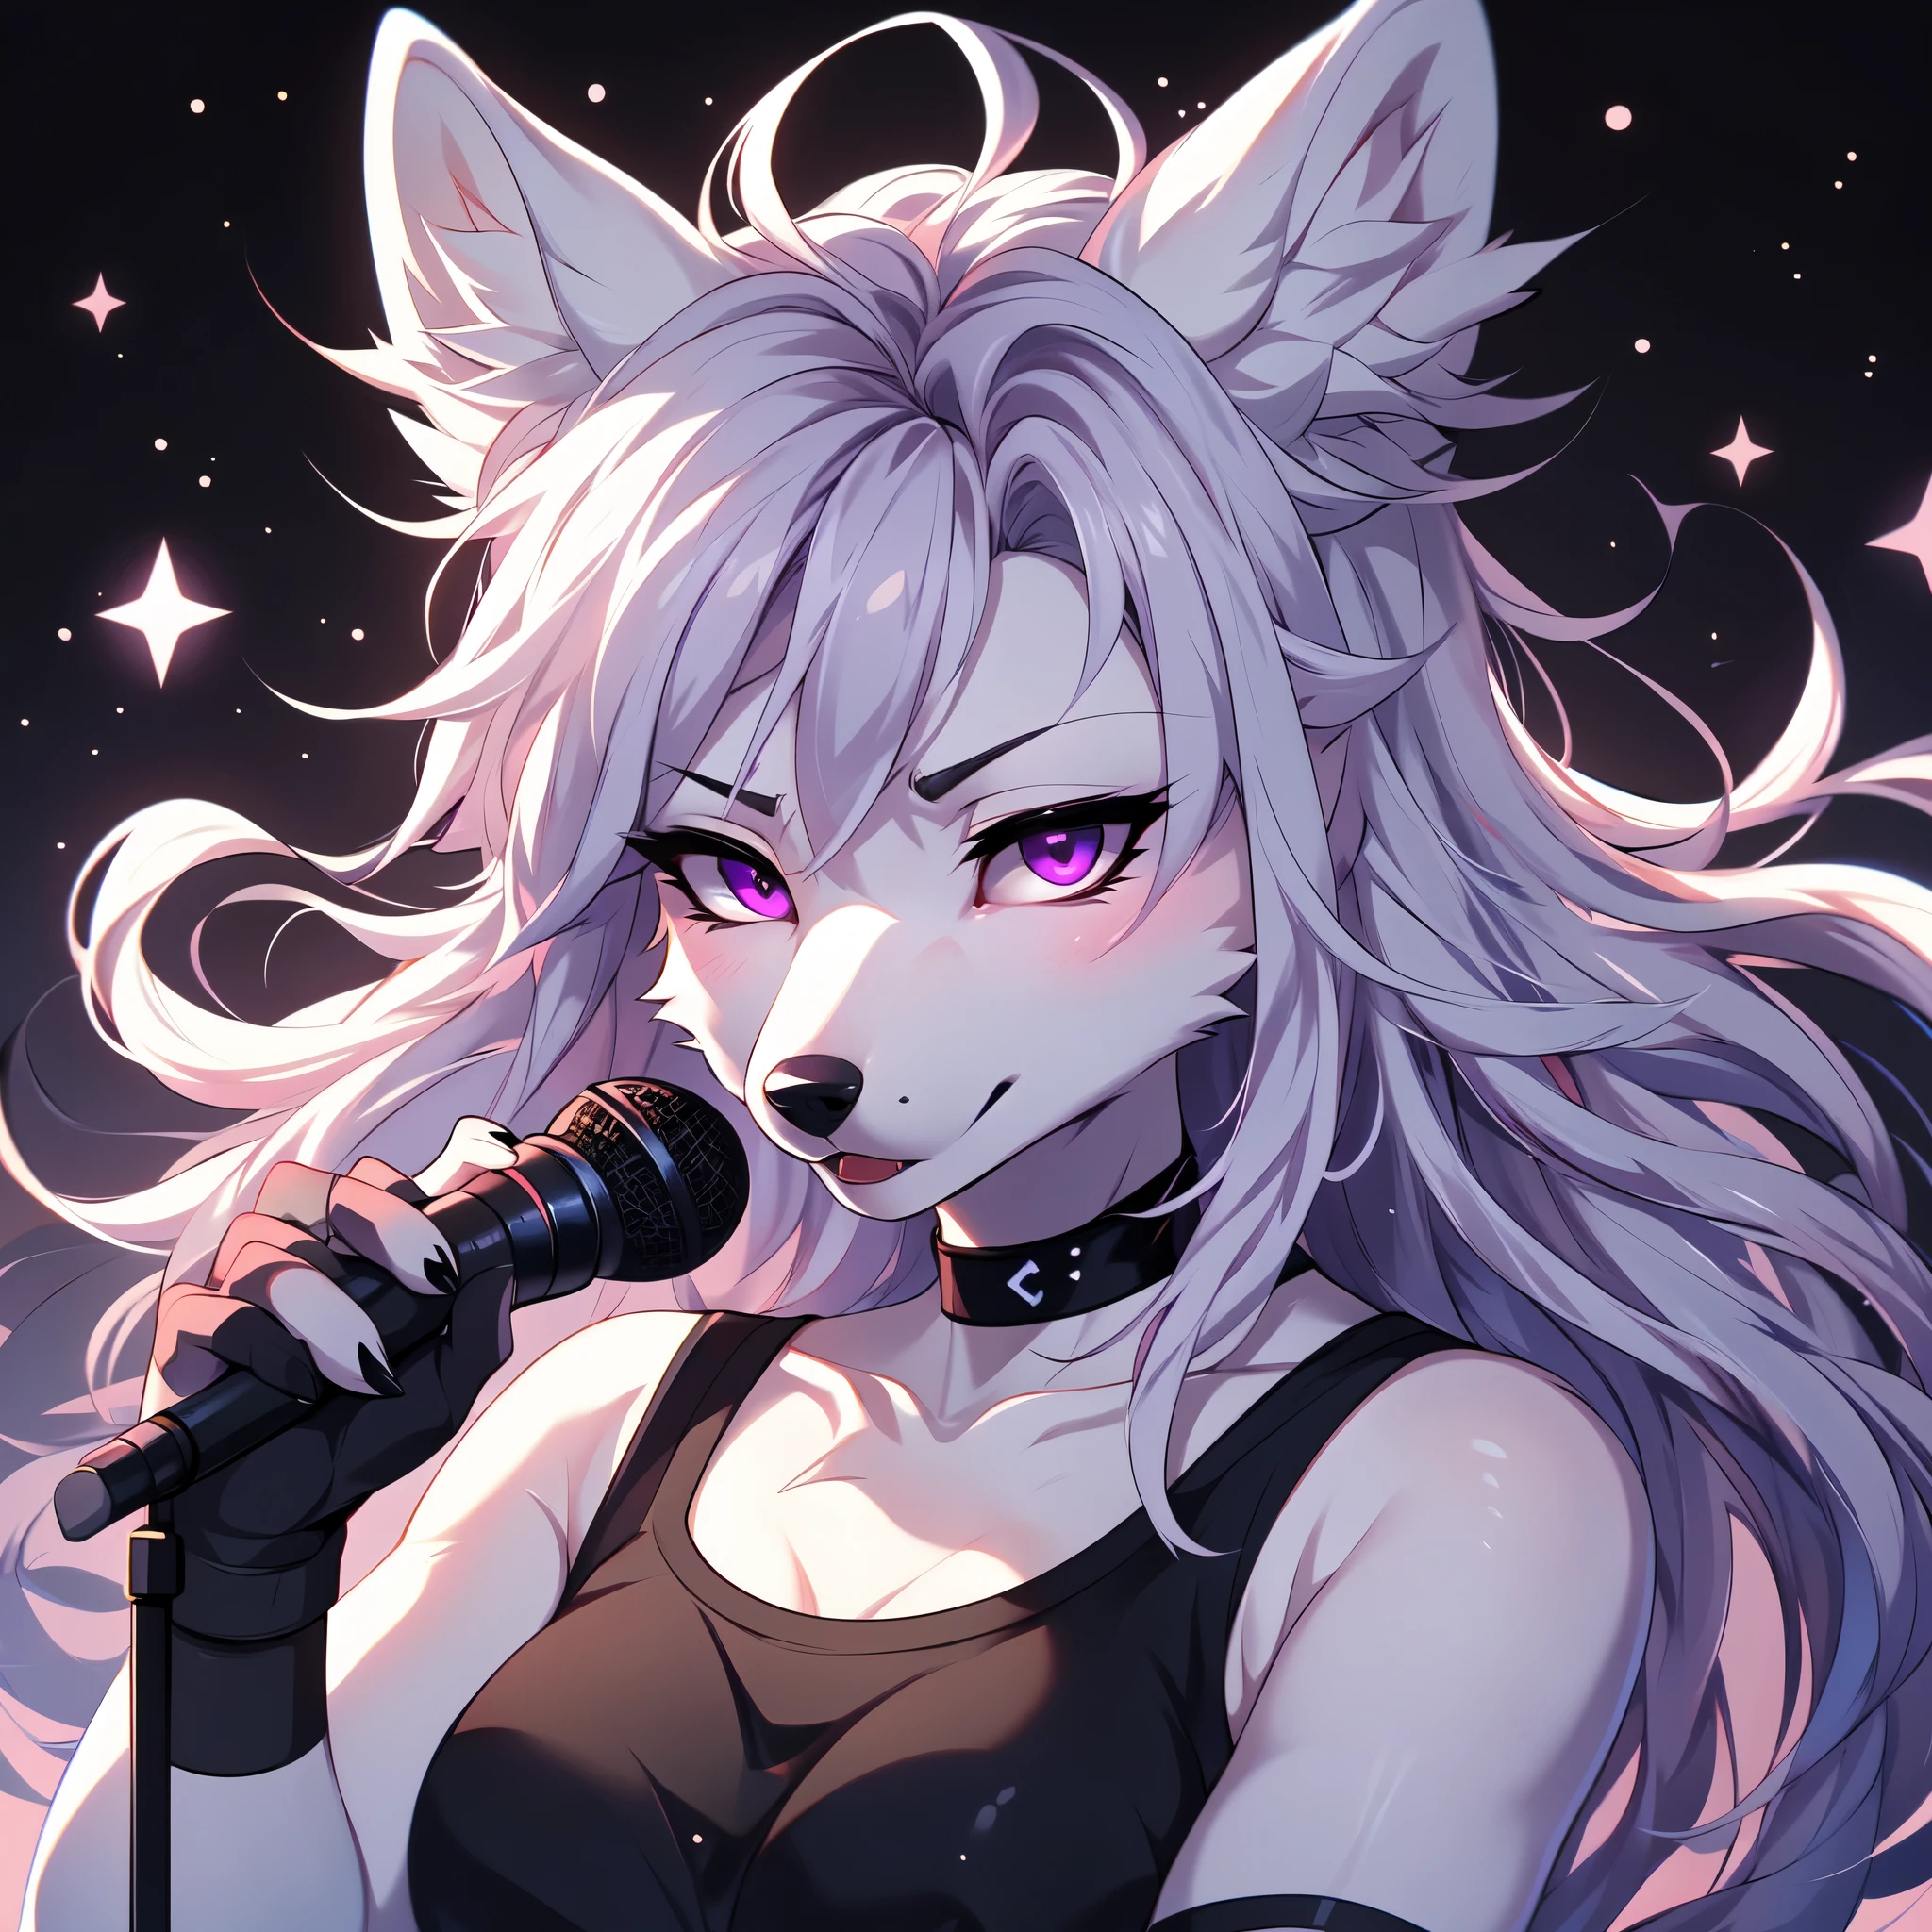  by fumiko, by hyattlen, by hioshiru, an all while female wolf, white wolf ears, cute snout, black nose, purple eyes, long white hair, mouth slightly open, serious face, determined expression, wearing black shirt, black choker, black fingerless gloves, holding a microphone, front view , tilting her head down